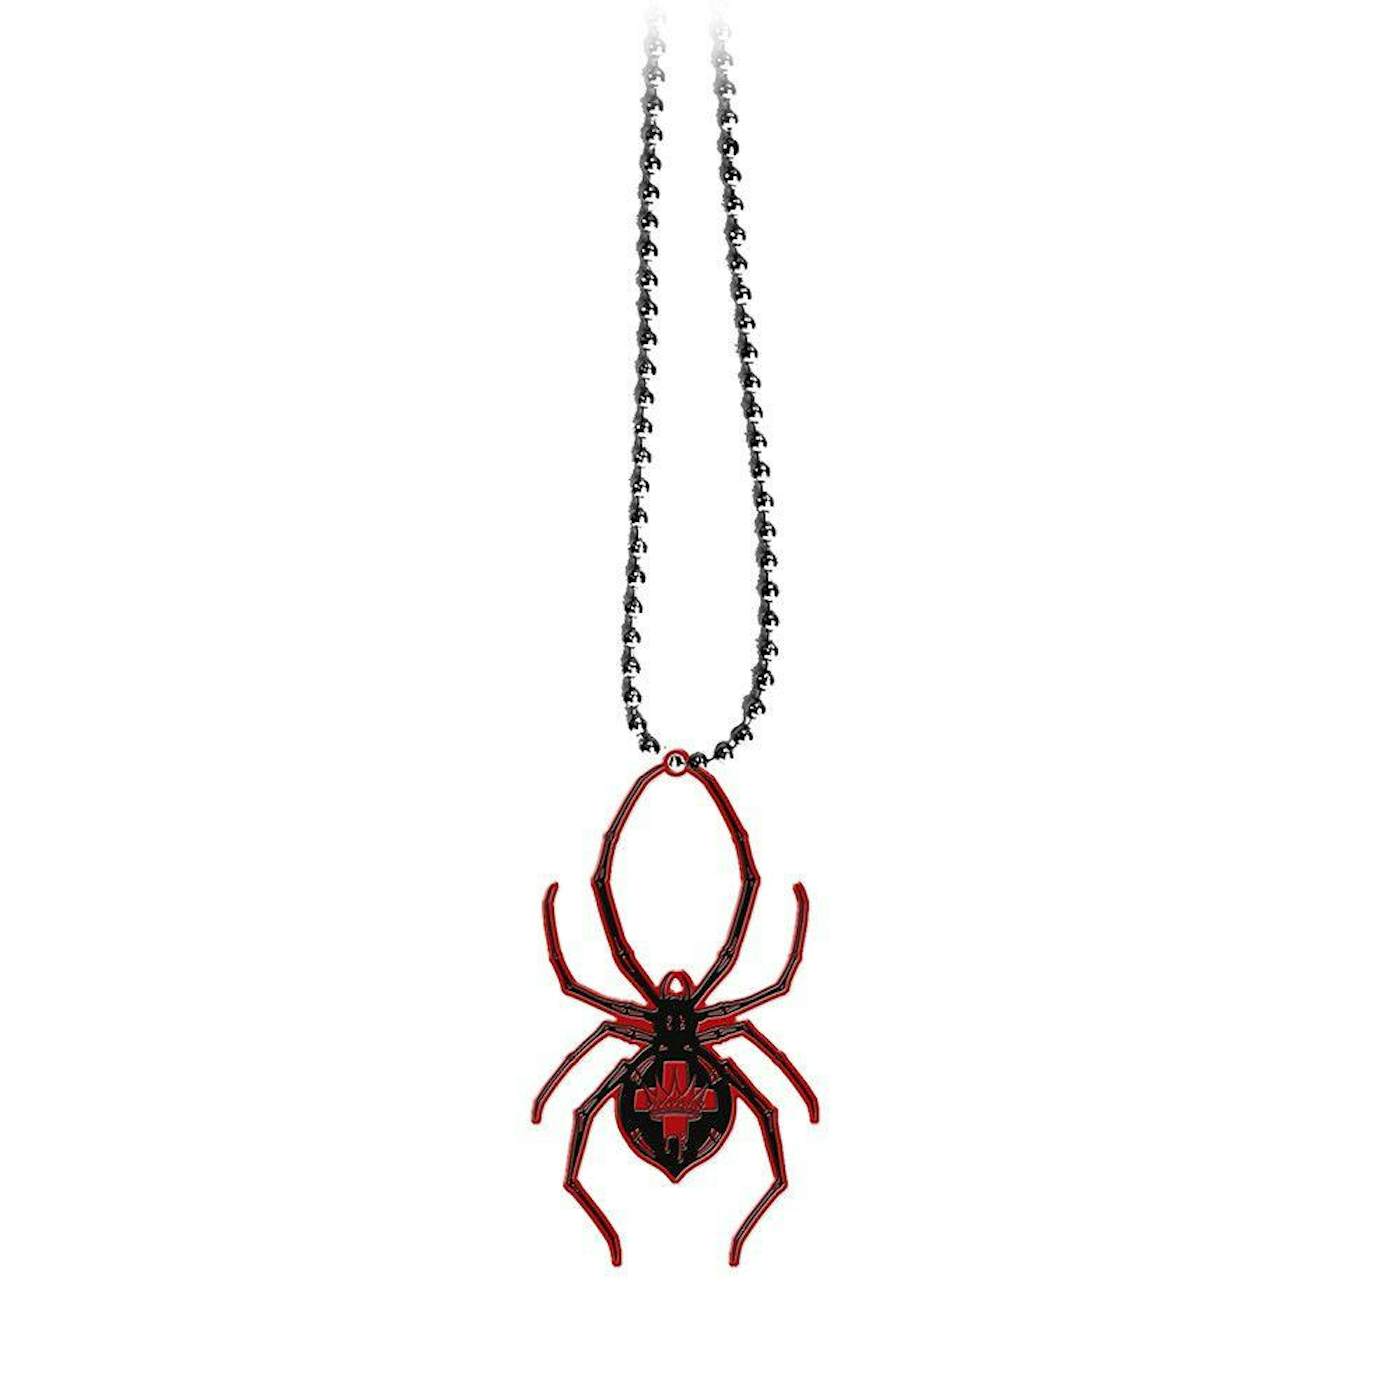 In This Moment Black Widow Necklace